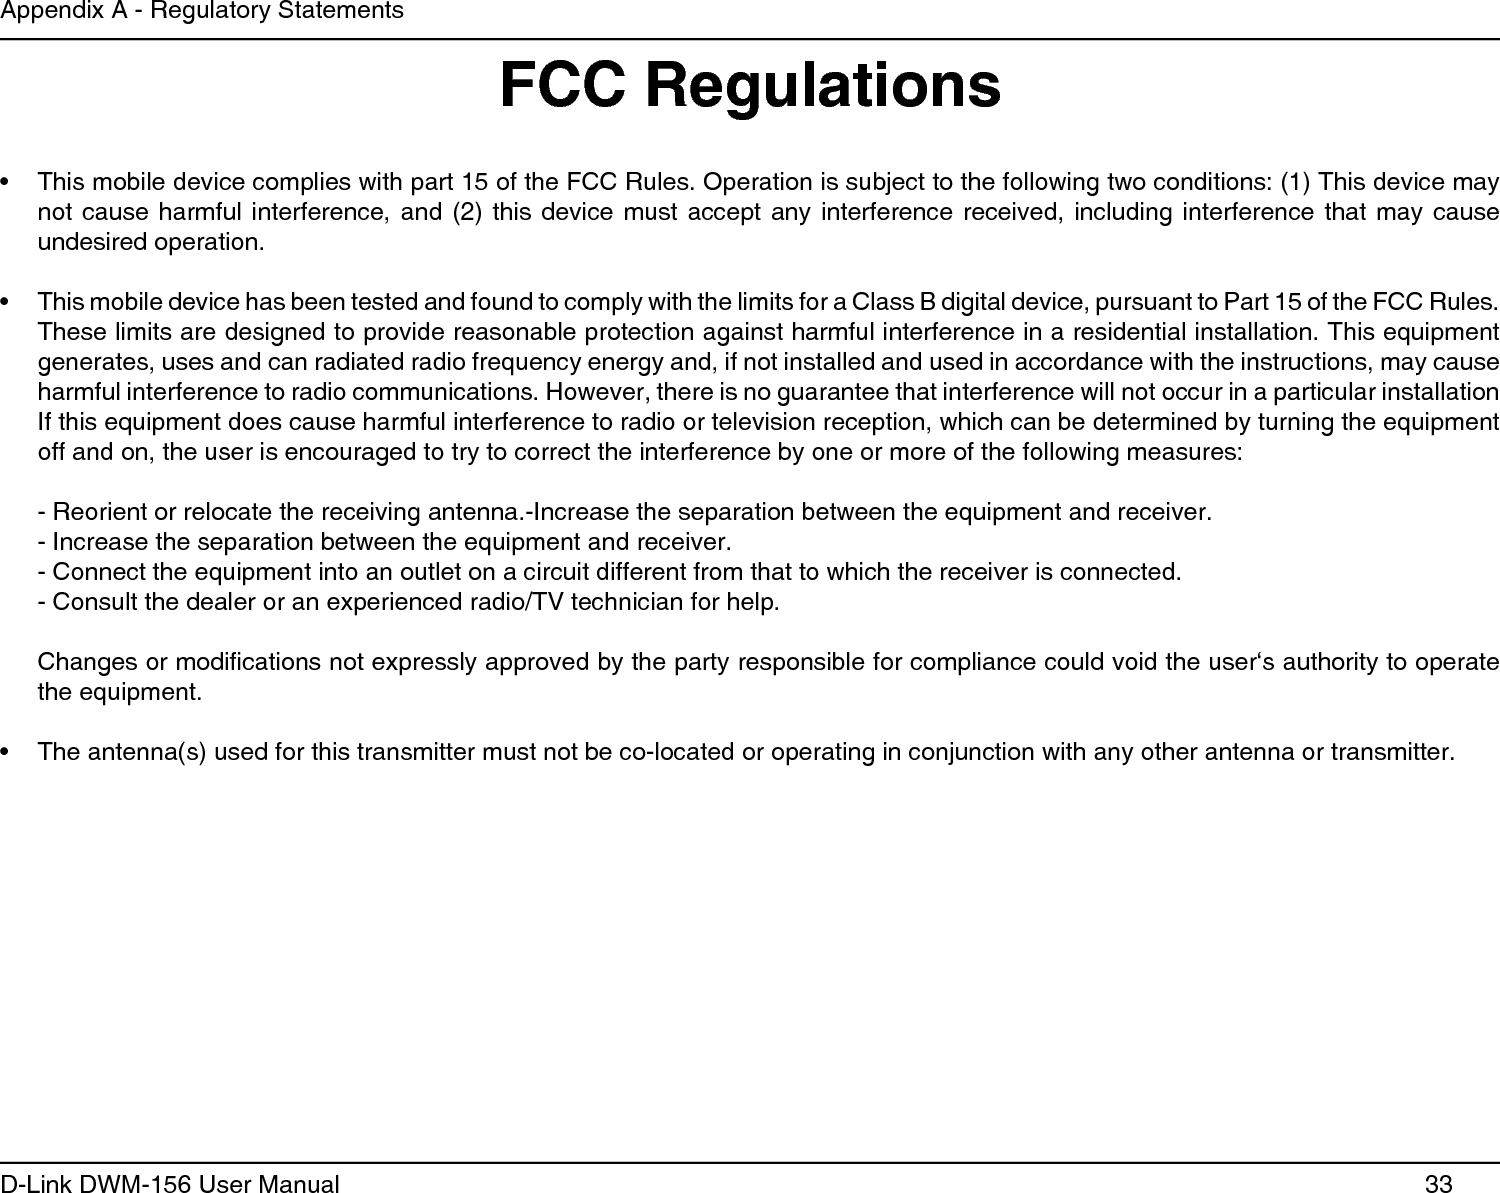 33D-Link DWM-156 User ManualAppendix A - Regulatory StatementsThis mobile device complies with part 15 of the FCC Rules. Operation is subject to the following two conditions: (1) This device may • not cause harmful  interference,  and  (2) this device  must  accept  any interference received,  including  interference  that may cause undesired operation.This mobile device has been tested and found to comply with the limits for a Class B digital device, pursuant to Part 15 of the FCC Rules. • These limits are designed to provide reasonable protection against harmful interference in a residential installation. This equipment generates, uses and can radiated radio frequency energy and, if not installed and used in accordance with the instructions, may cause harmful interference to radio communications. However, there is no guarantee that interference will not occur in a particular installation If this equipment does cause harmful interference to radio or television reception, which can be determined by turning the equipment off and on, the user is encouraged to try to correct the interference by one or more of the following measures:- Reorient or relocate the receiving antenna.-Increase the separation between the equipment and receiver.- Increase the separation between the equipment and receiver.- Connect the equipment into an outlet on a circuit different from that to which the receiver is connected.- Consult the dealer or an experienced radio/TV technician for help. Changes or modications not expressly approved by the party responsible for compliance could void the user‘s authority to operate the equipment.The antenna(s) used for this transmitter must not be co-located or operating in conjunction with any other antenna or transmitter.• FCC Regulations